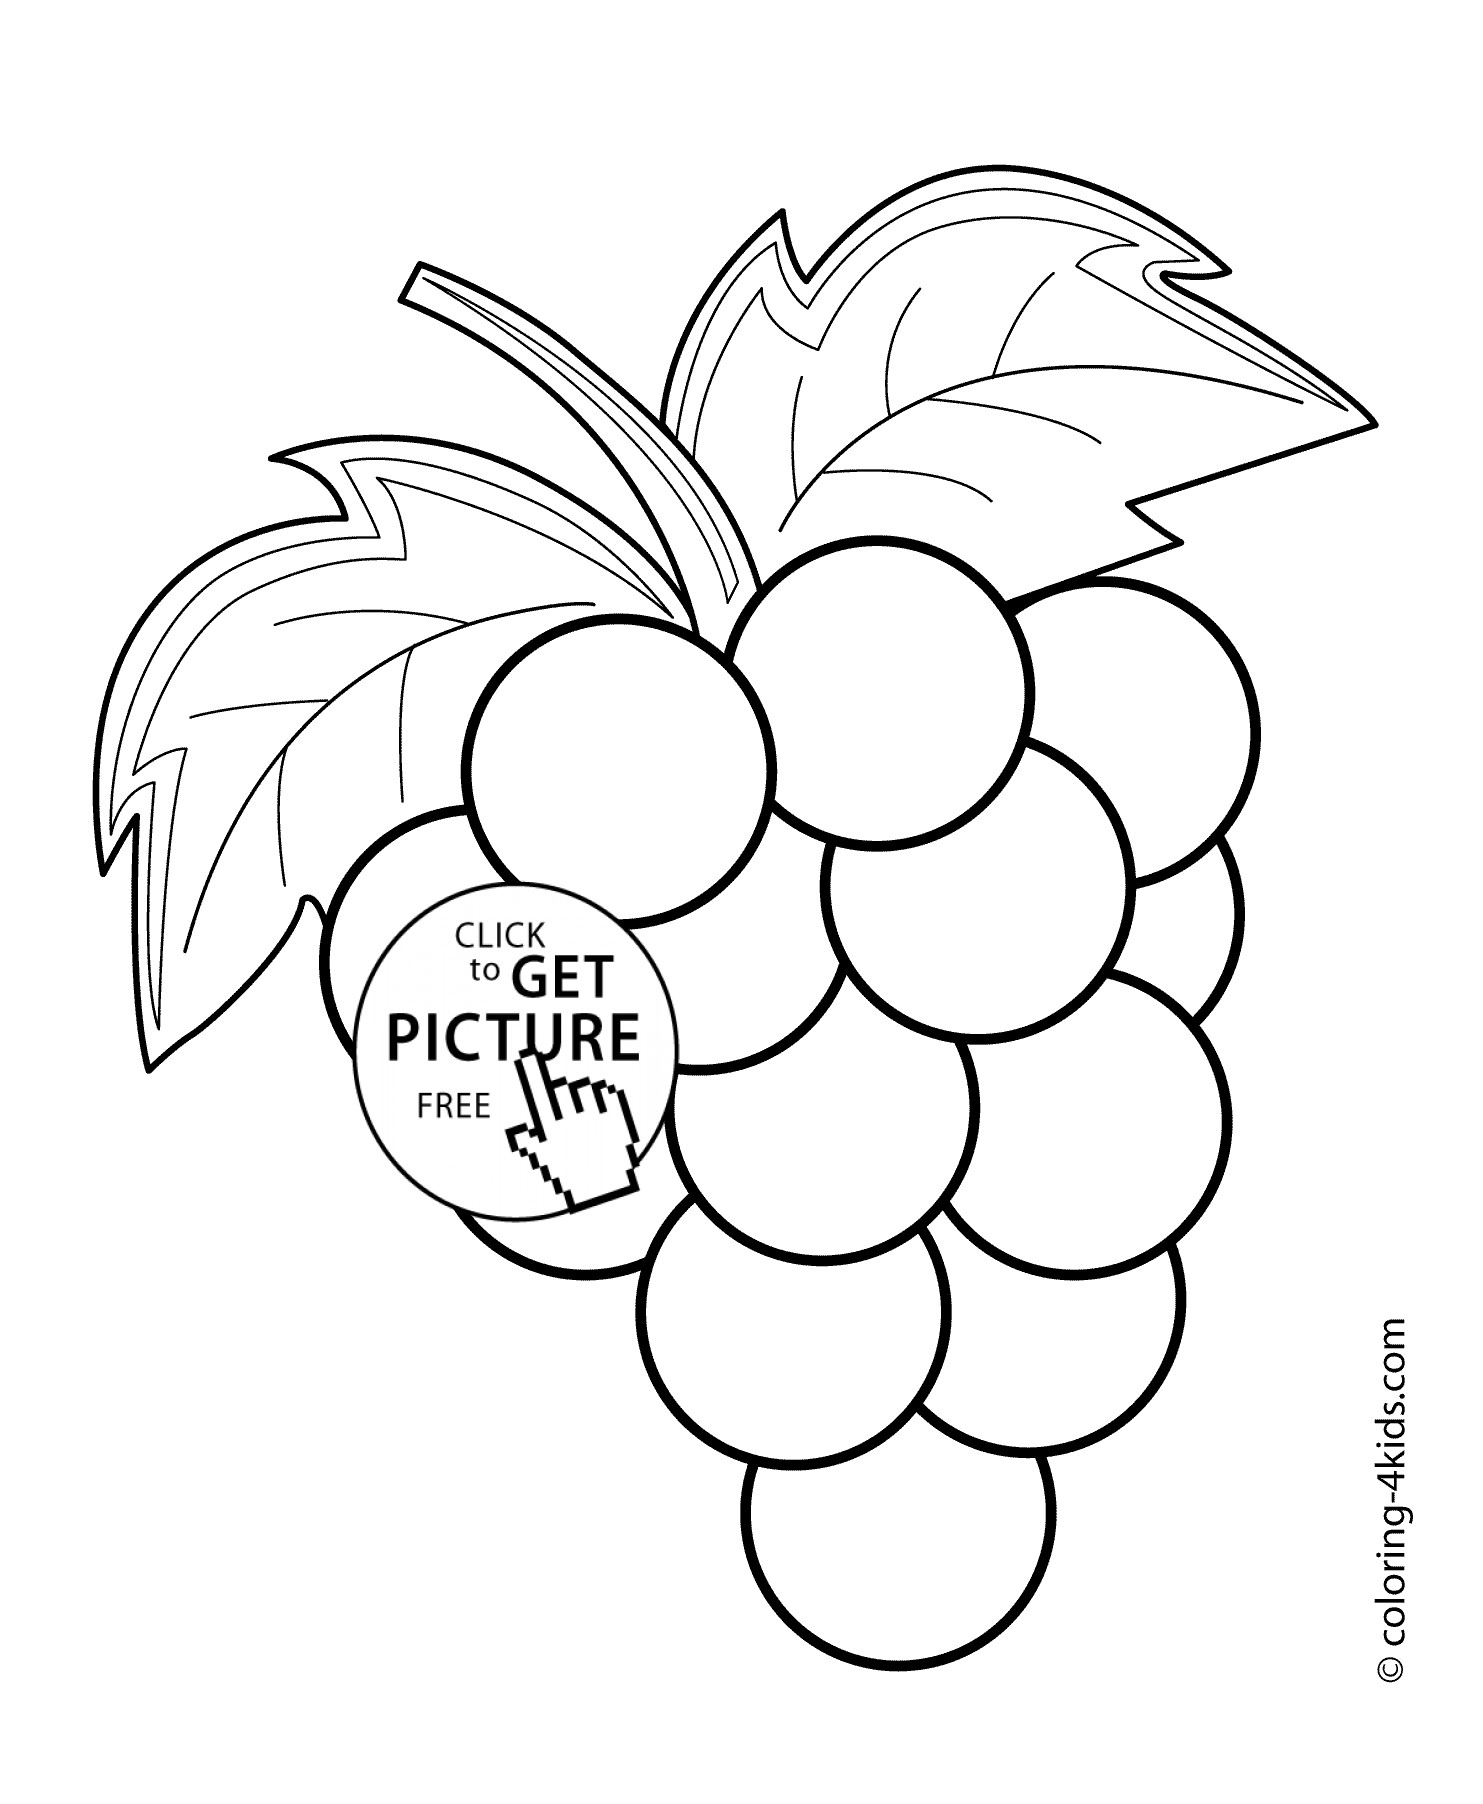 Grapes Coloring Pages
 Grapes fruits and berries coloring pages for kids